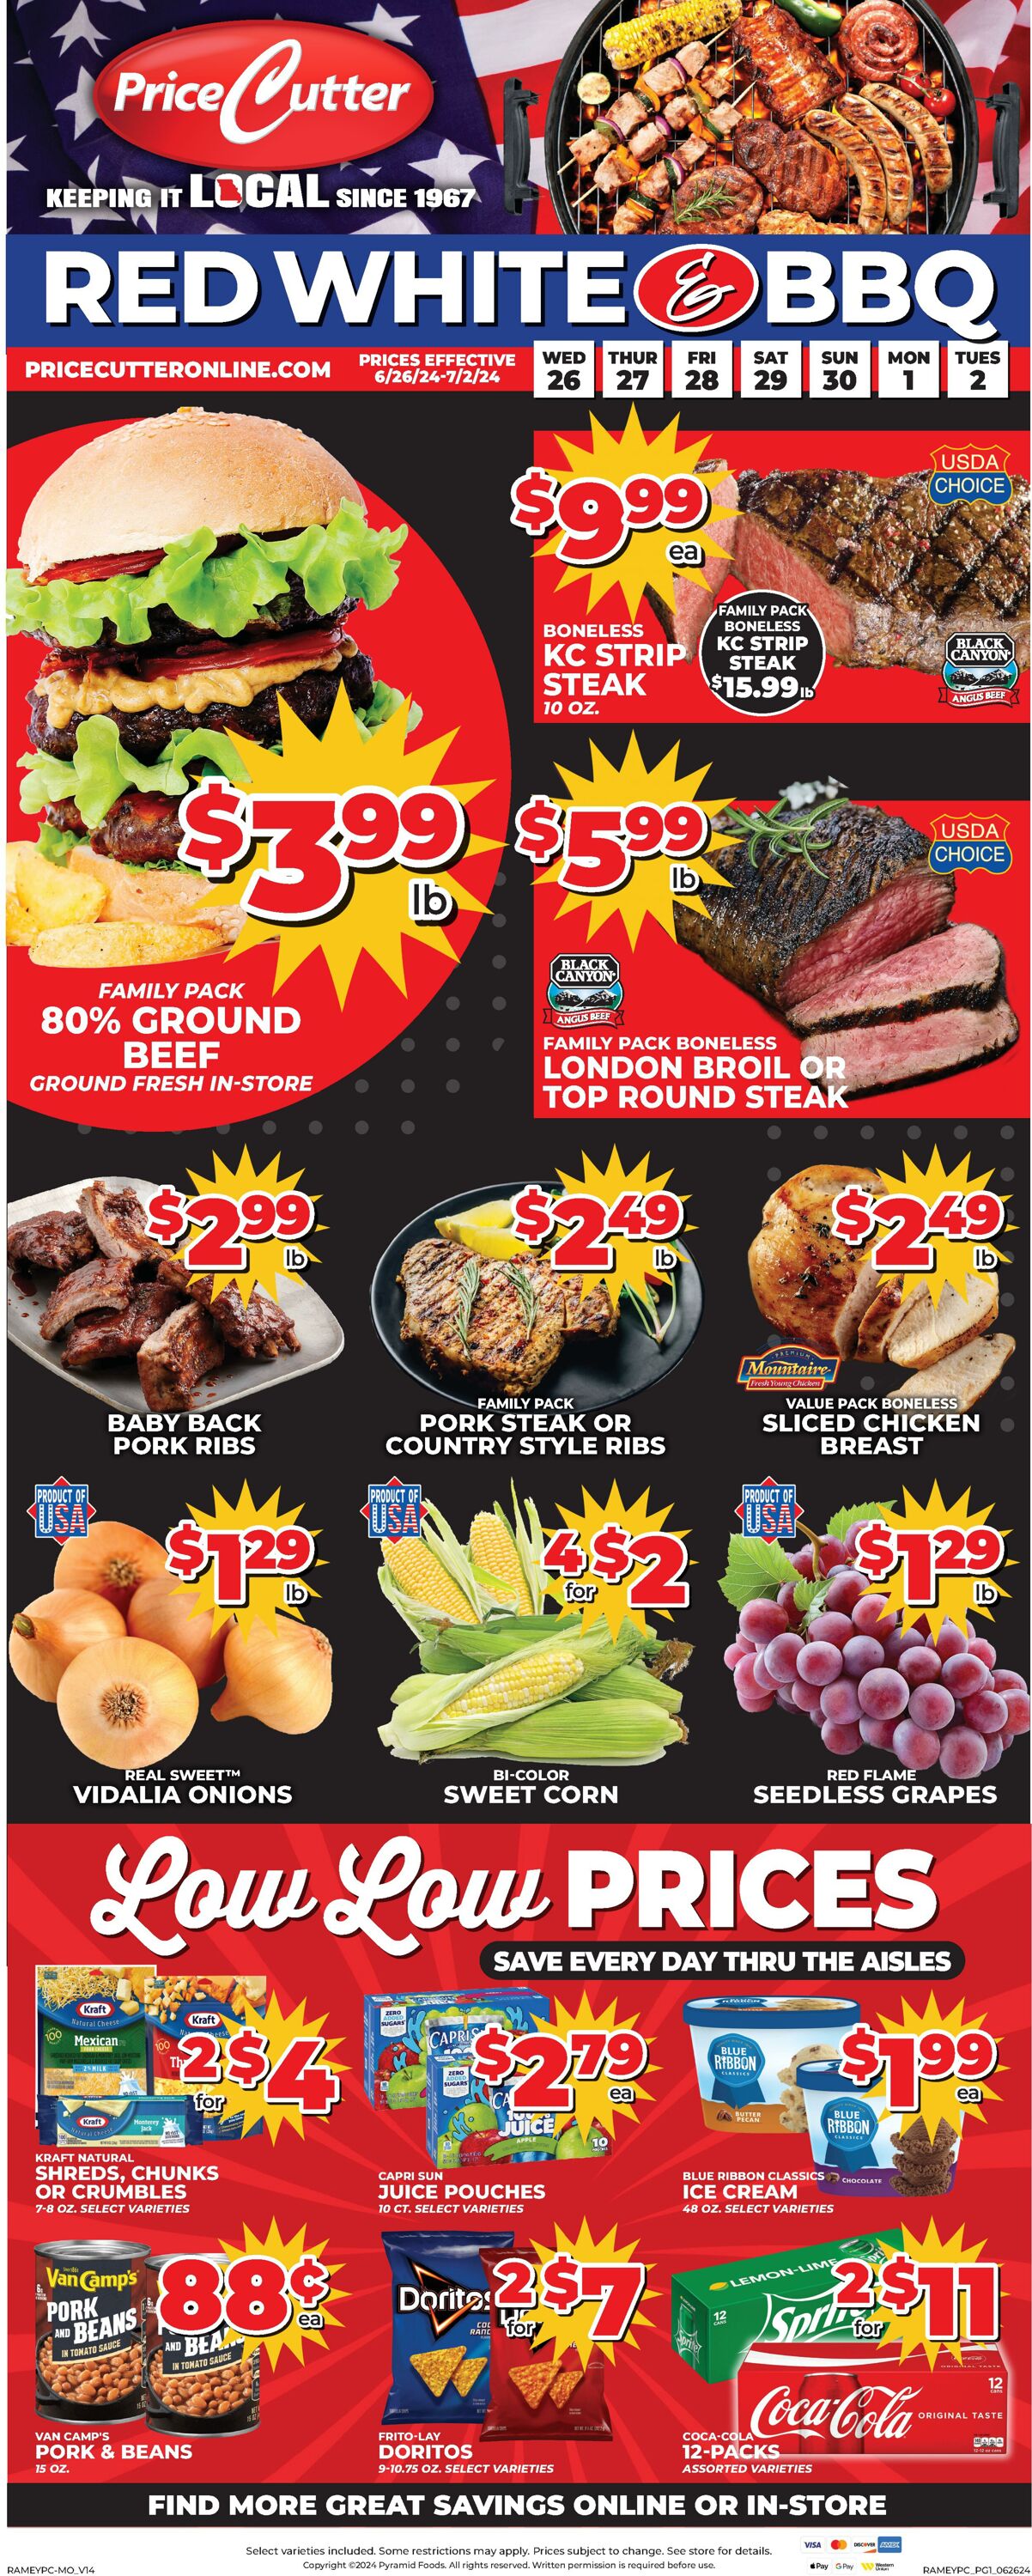 Price Cutter Promotional weekly ads